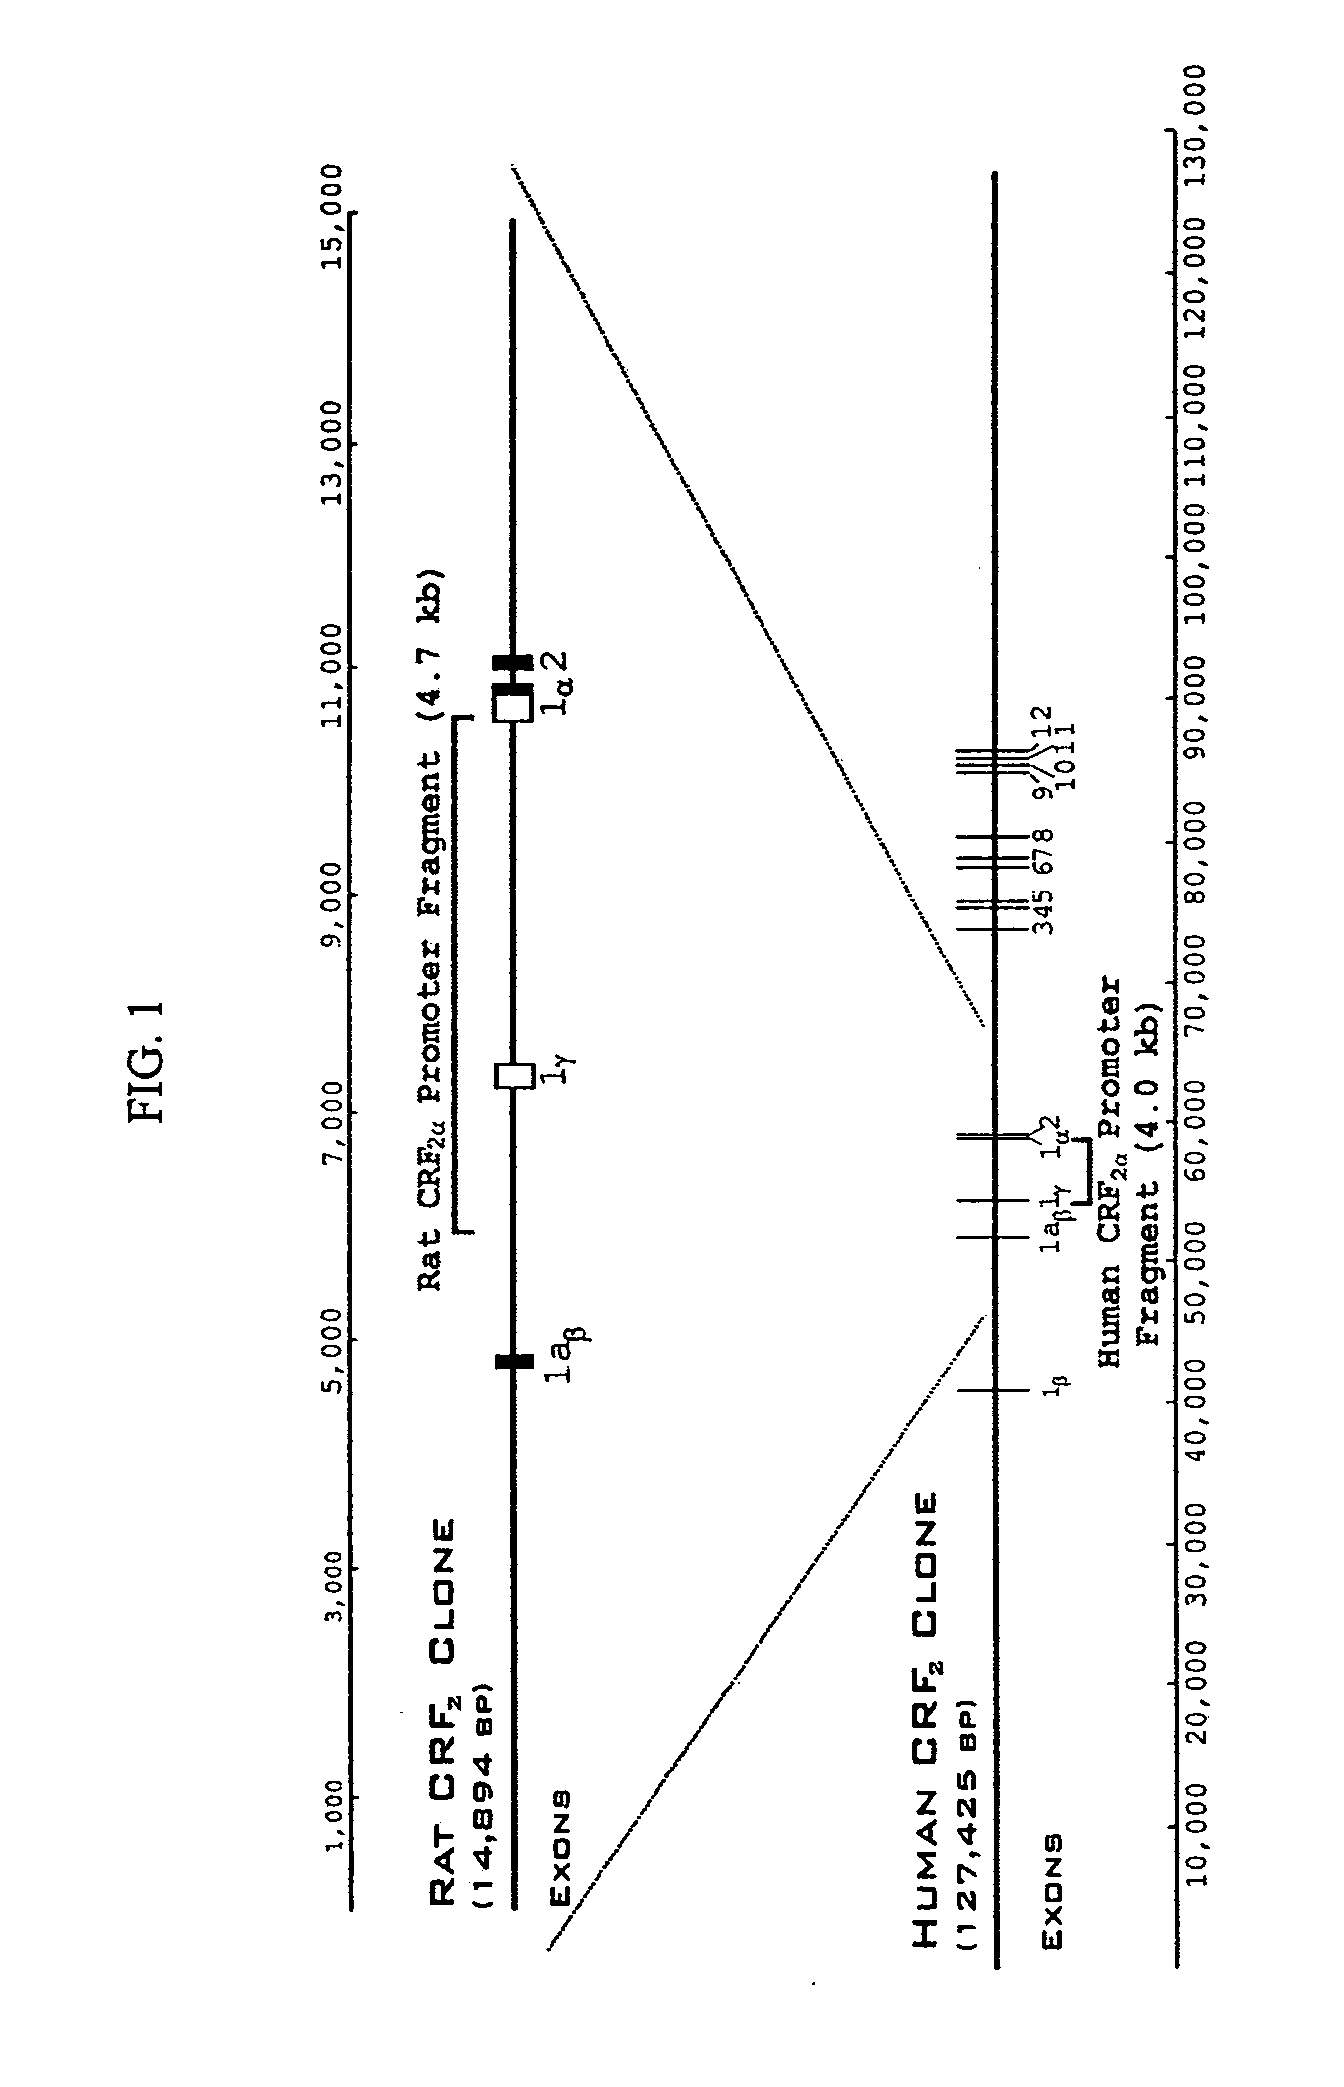 Promoter sequences for corticotropin releasing-factor receptor CRF2alpha and method of identifying agents that alter the activity of the promoter sequences